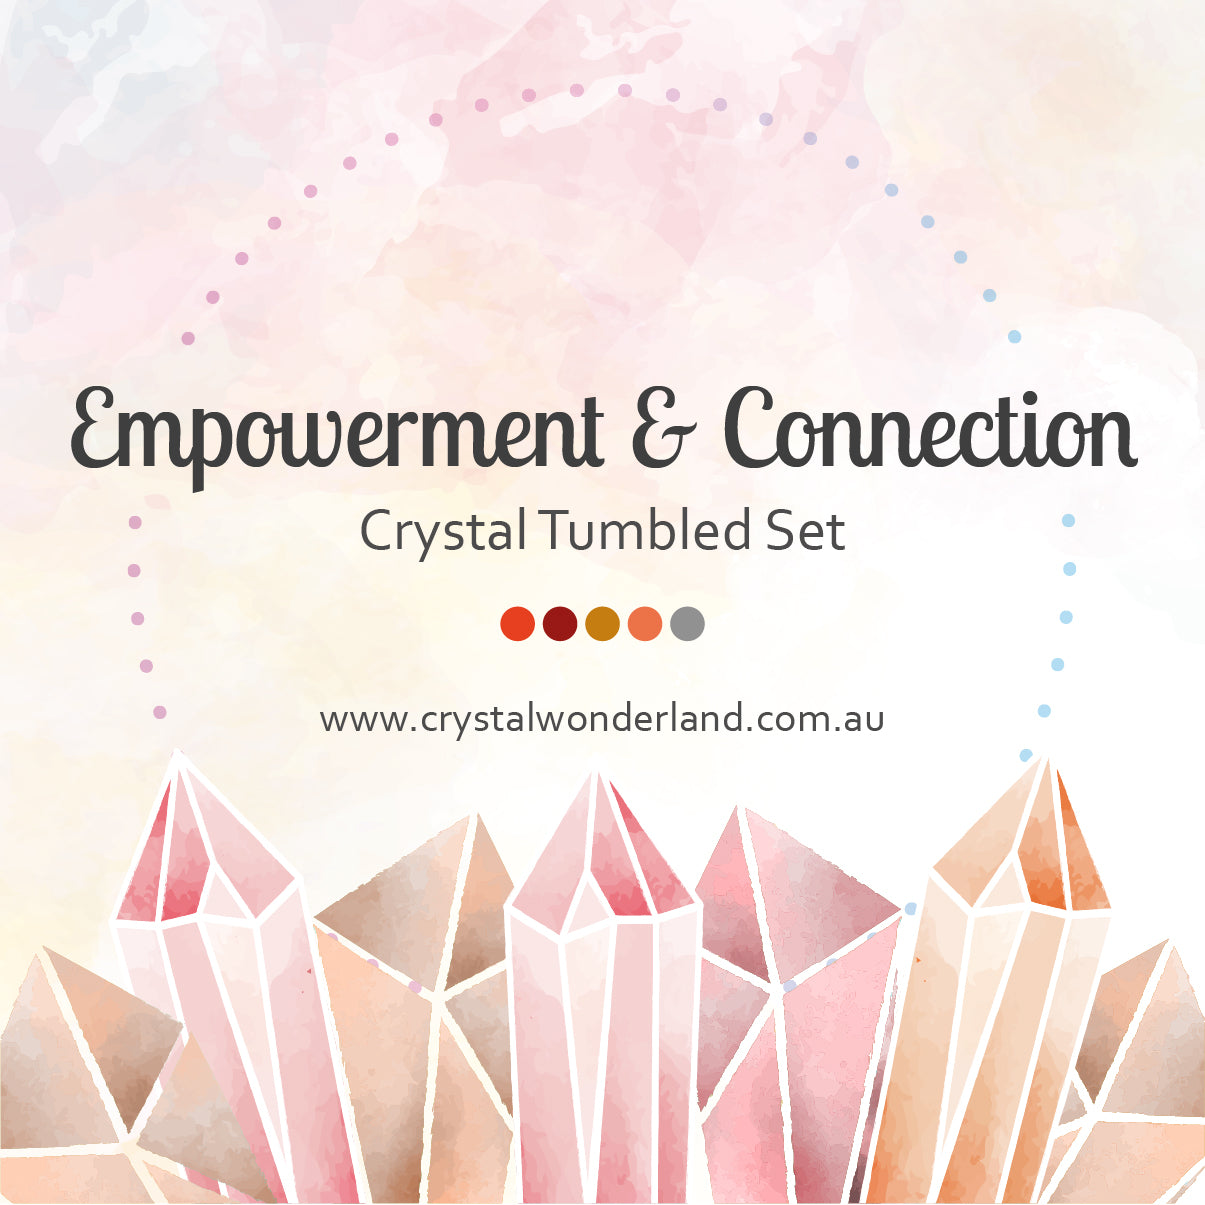 Empowerment & Connection Crystal Tumbled Gift Set